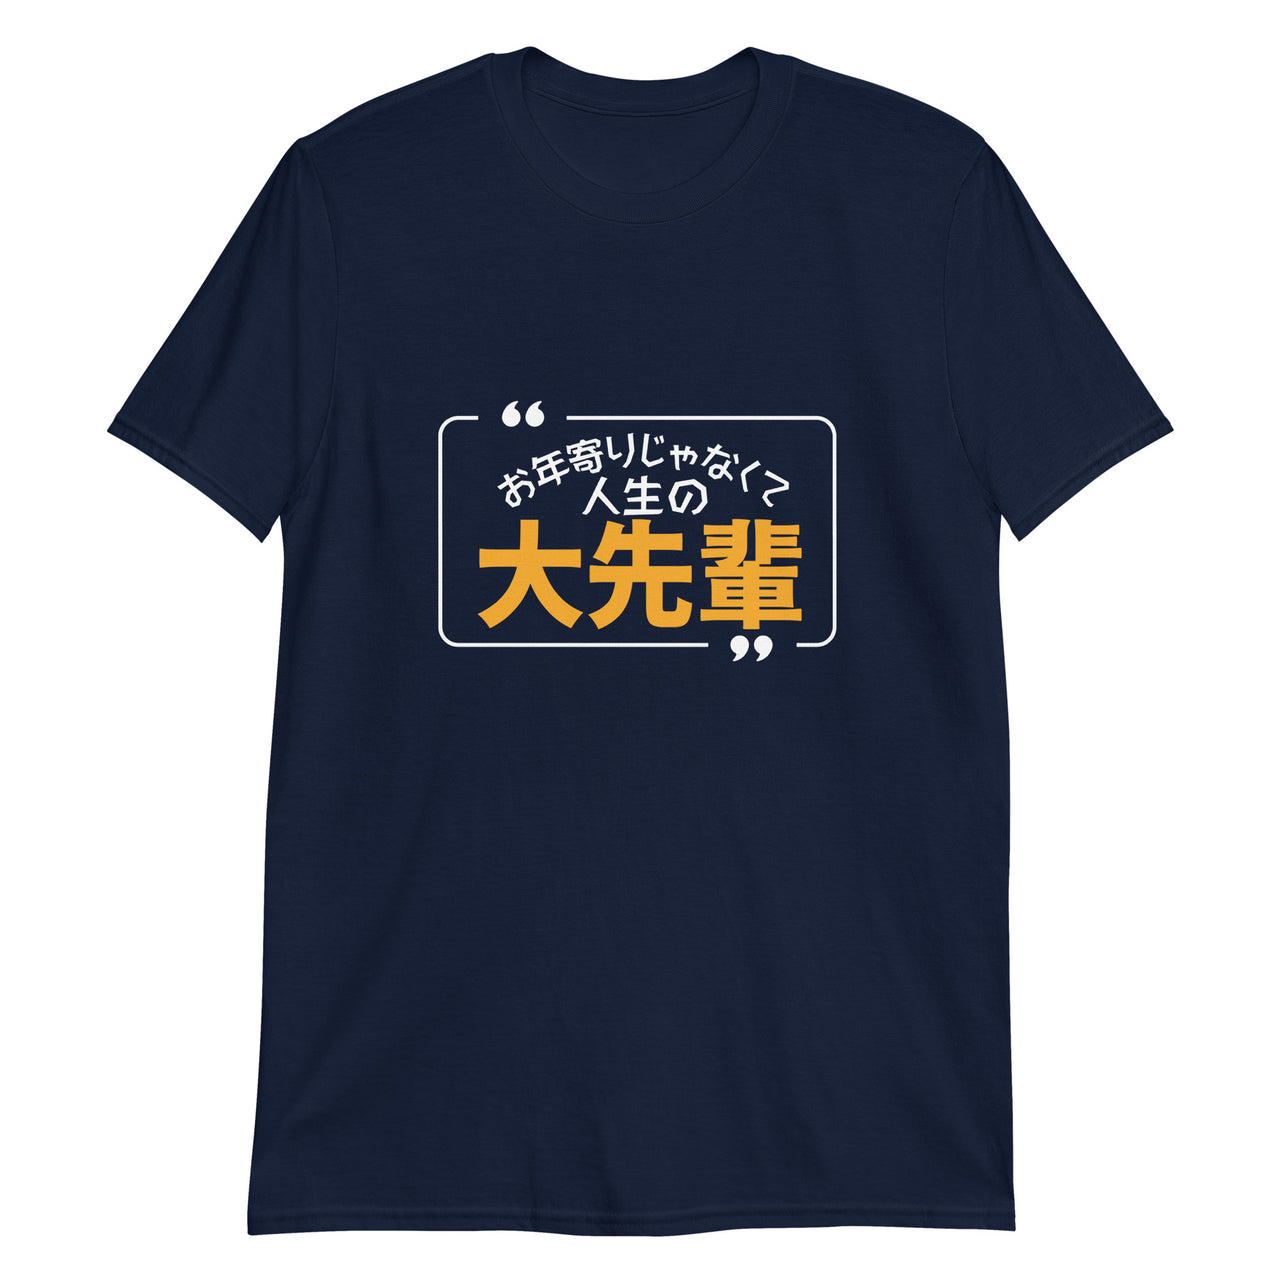 Life's Superior, Not Old in Japanese T-Shirt